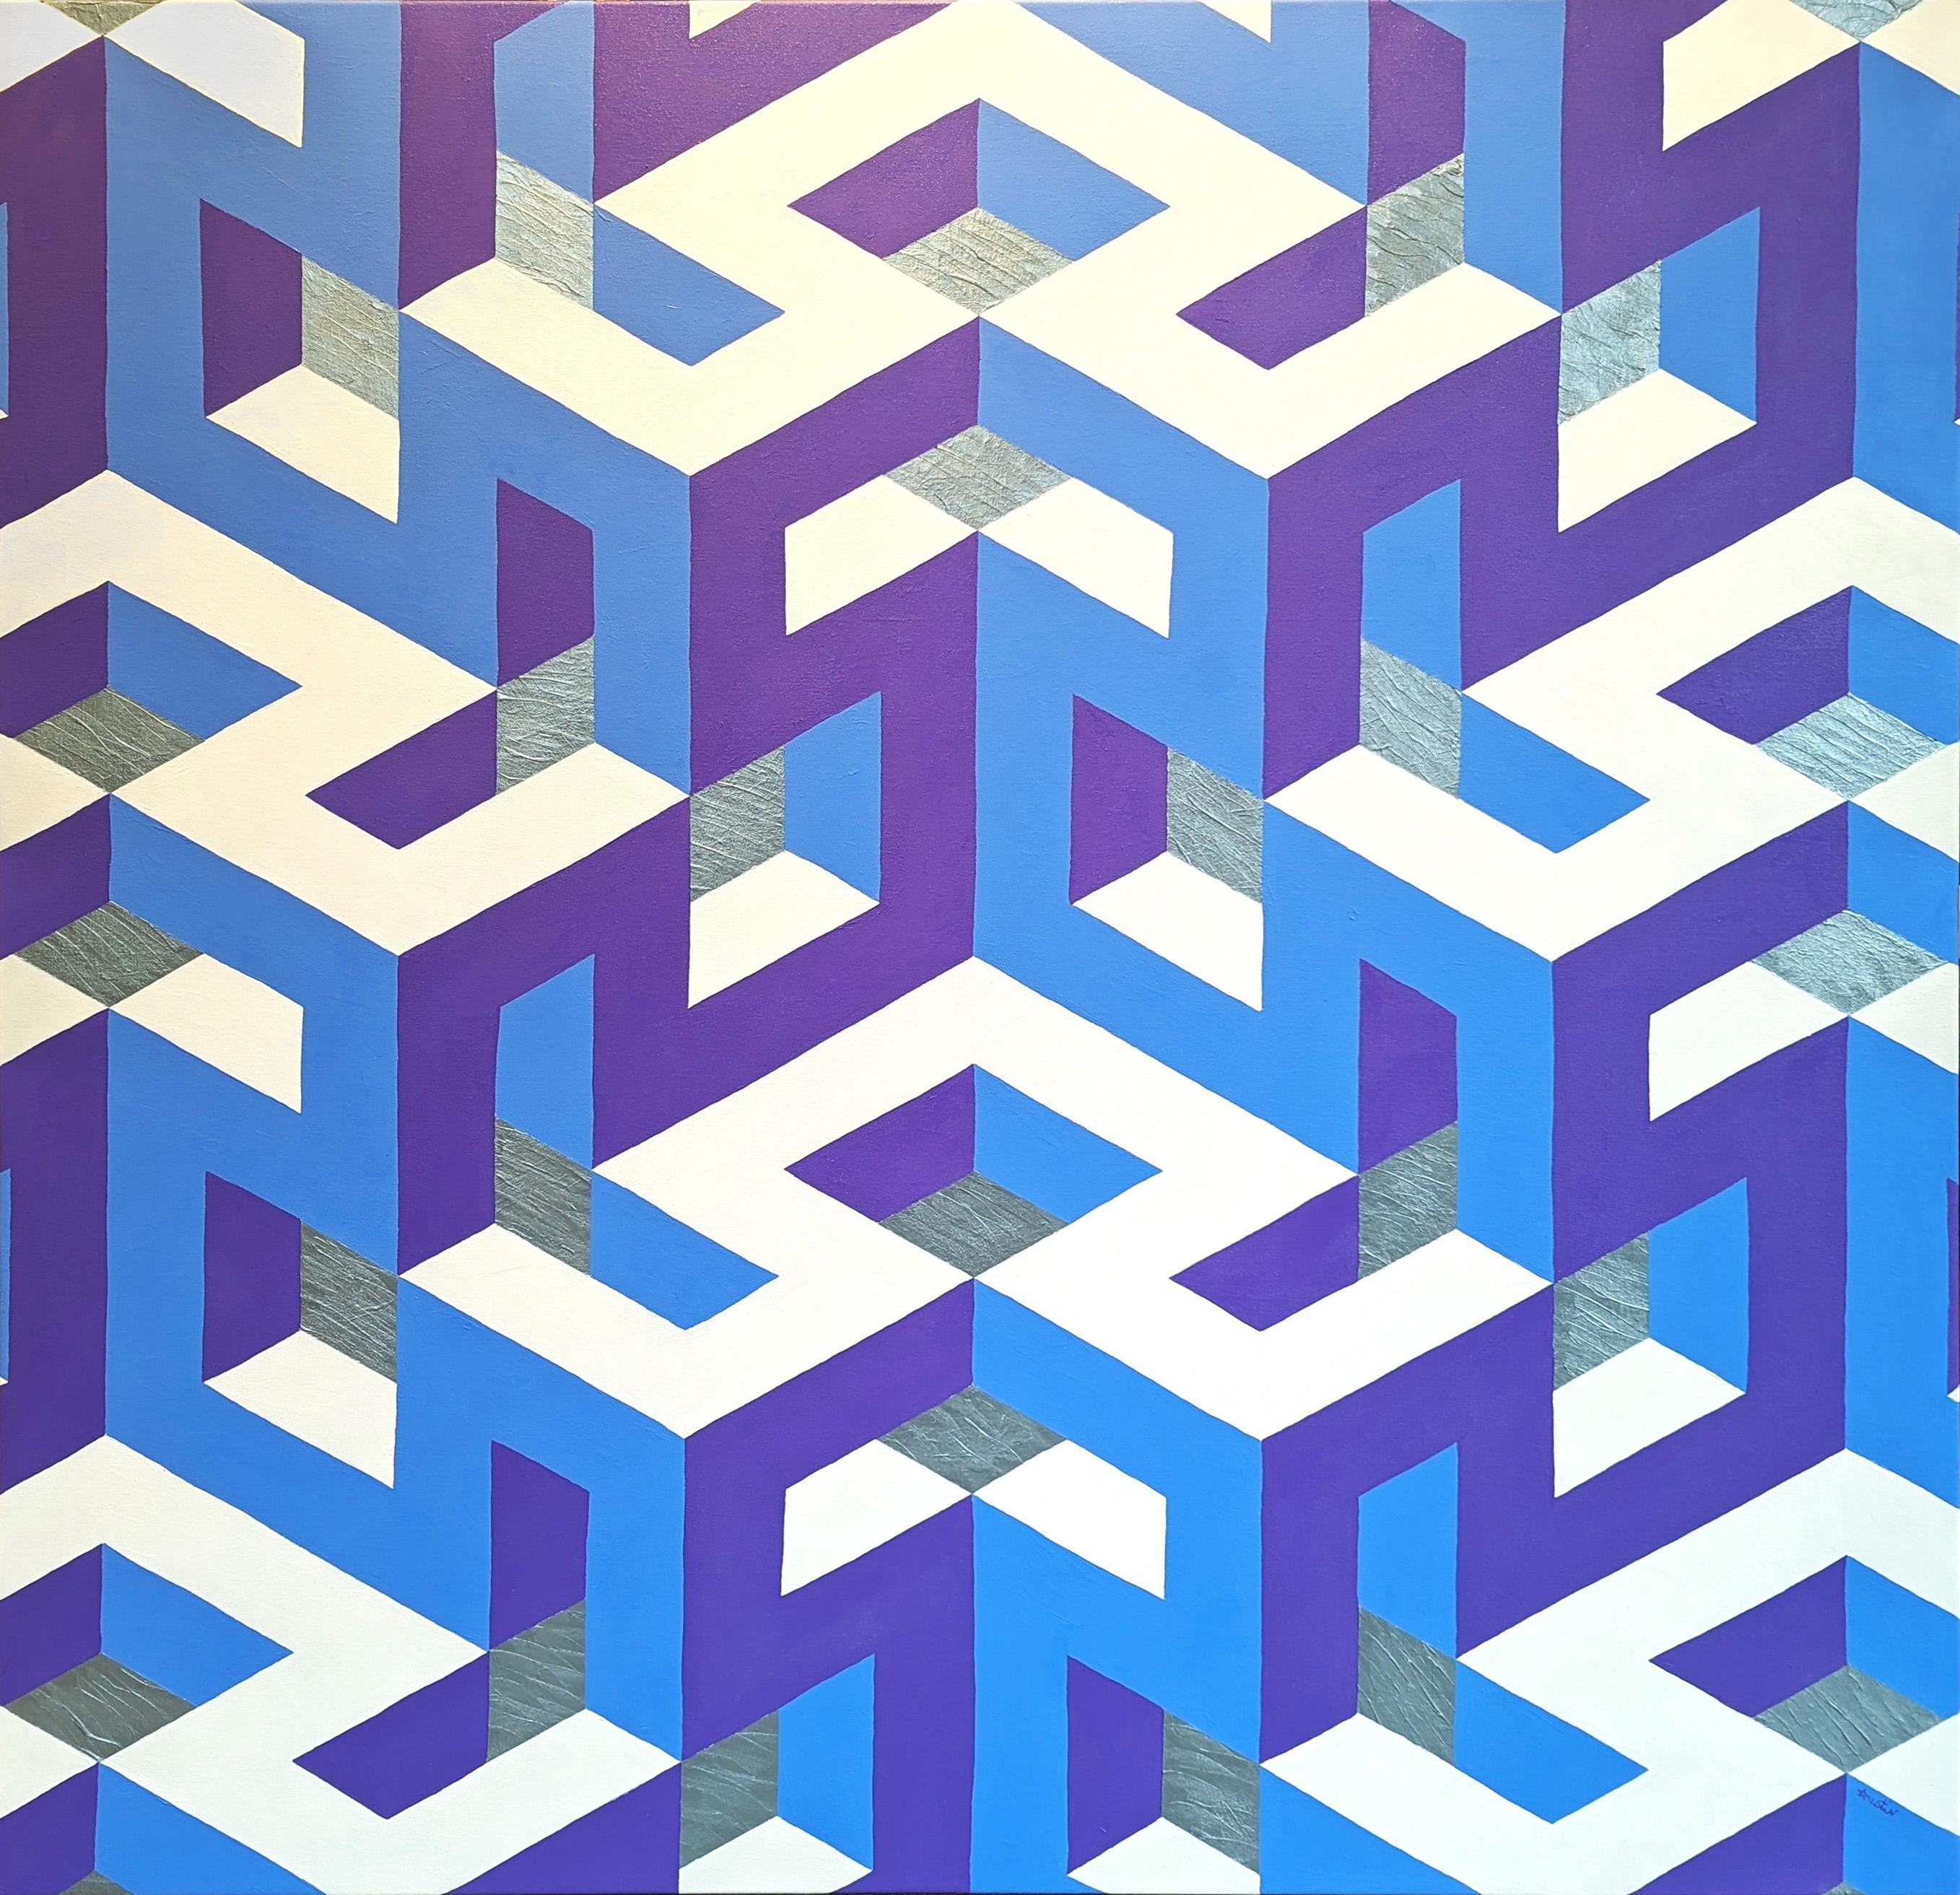 Hand painted and hand stretched op art painting by contemporary artist Austin Magruder. The work features abstract, geometric tessellations that create a mesmerizing pattern. Signed and dated on the reverse. Currently unframed, but options are